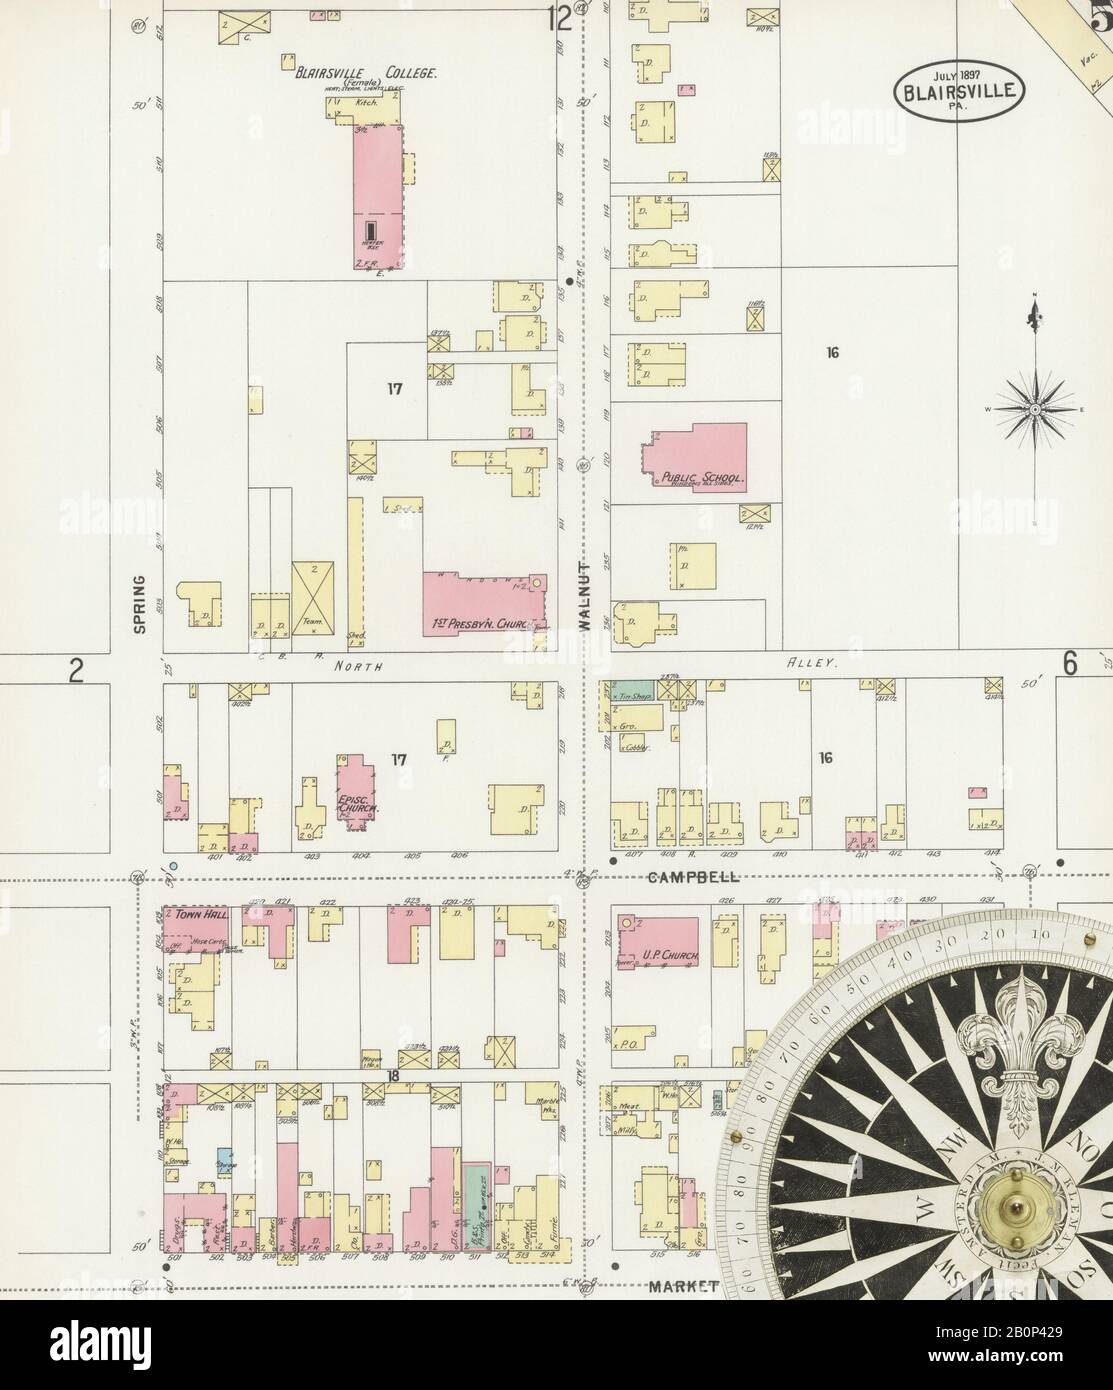 Image 5 of Sanborn Fire Insurance Map from Blairsville, Indiana County, Pennsylvania. Jul 1897. 13 Sheet(s), America, street map with a Nineteenth Century compass Stock Photo